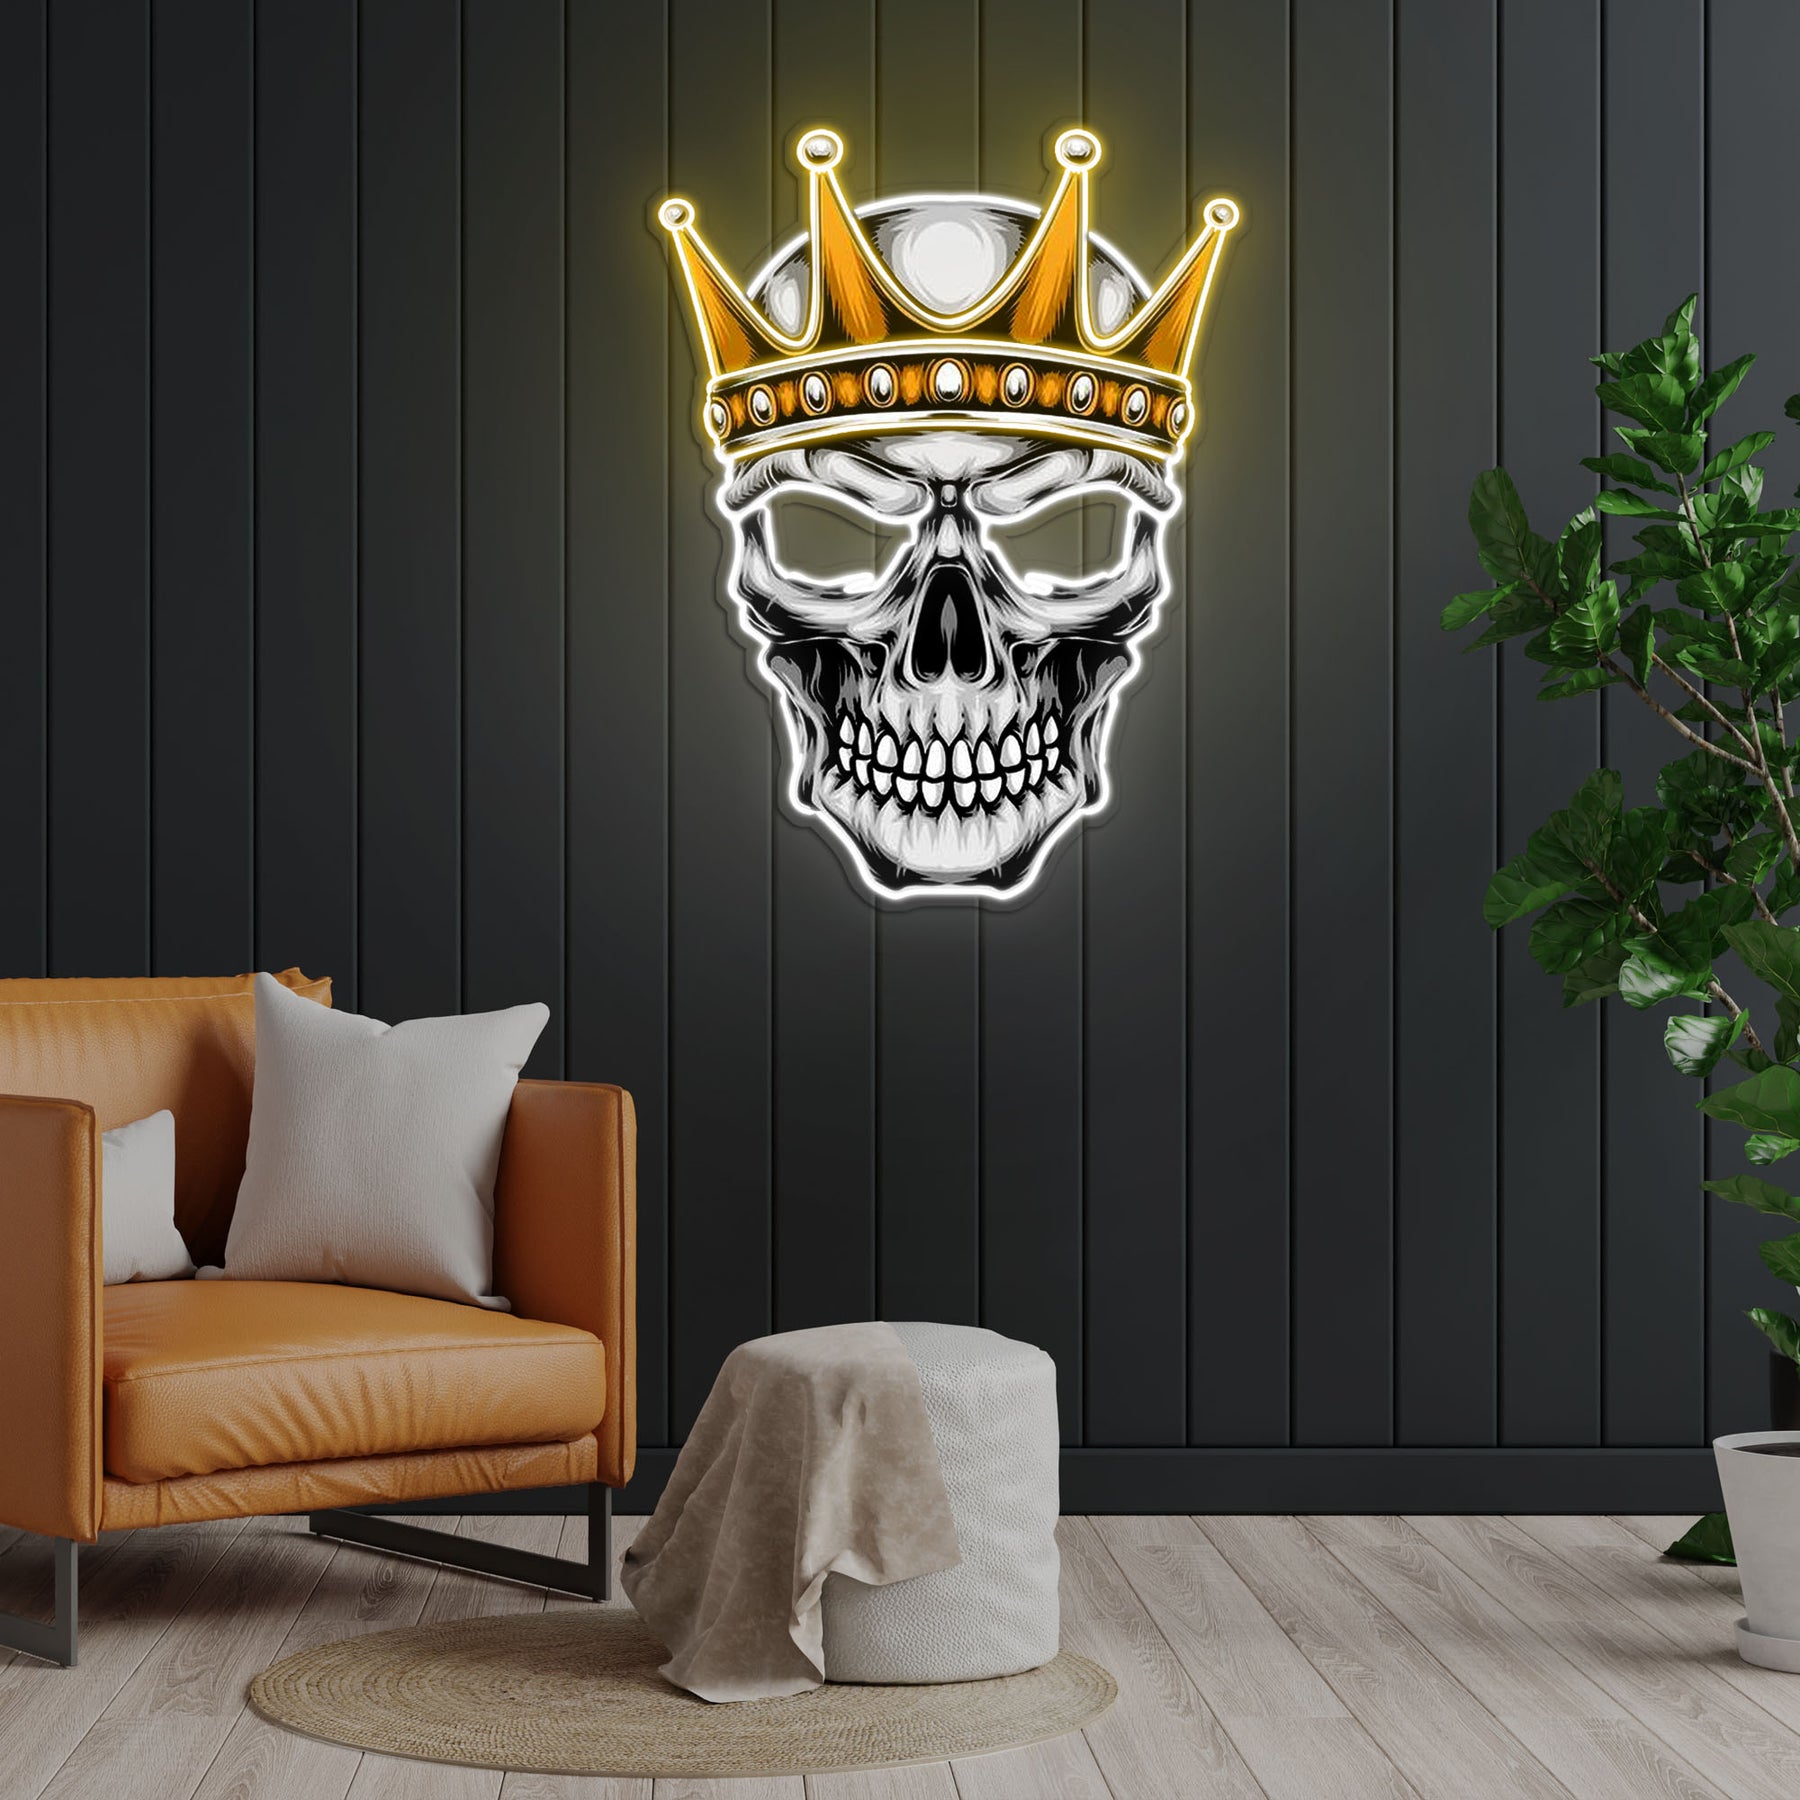 Skull With Crown Neon Sign x Acrylic Artwork